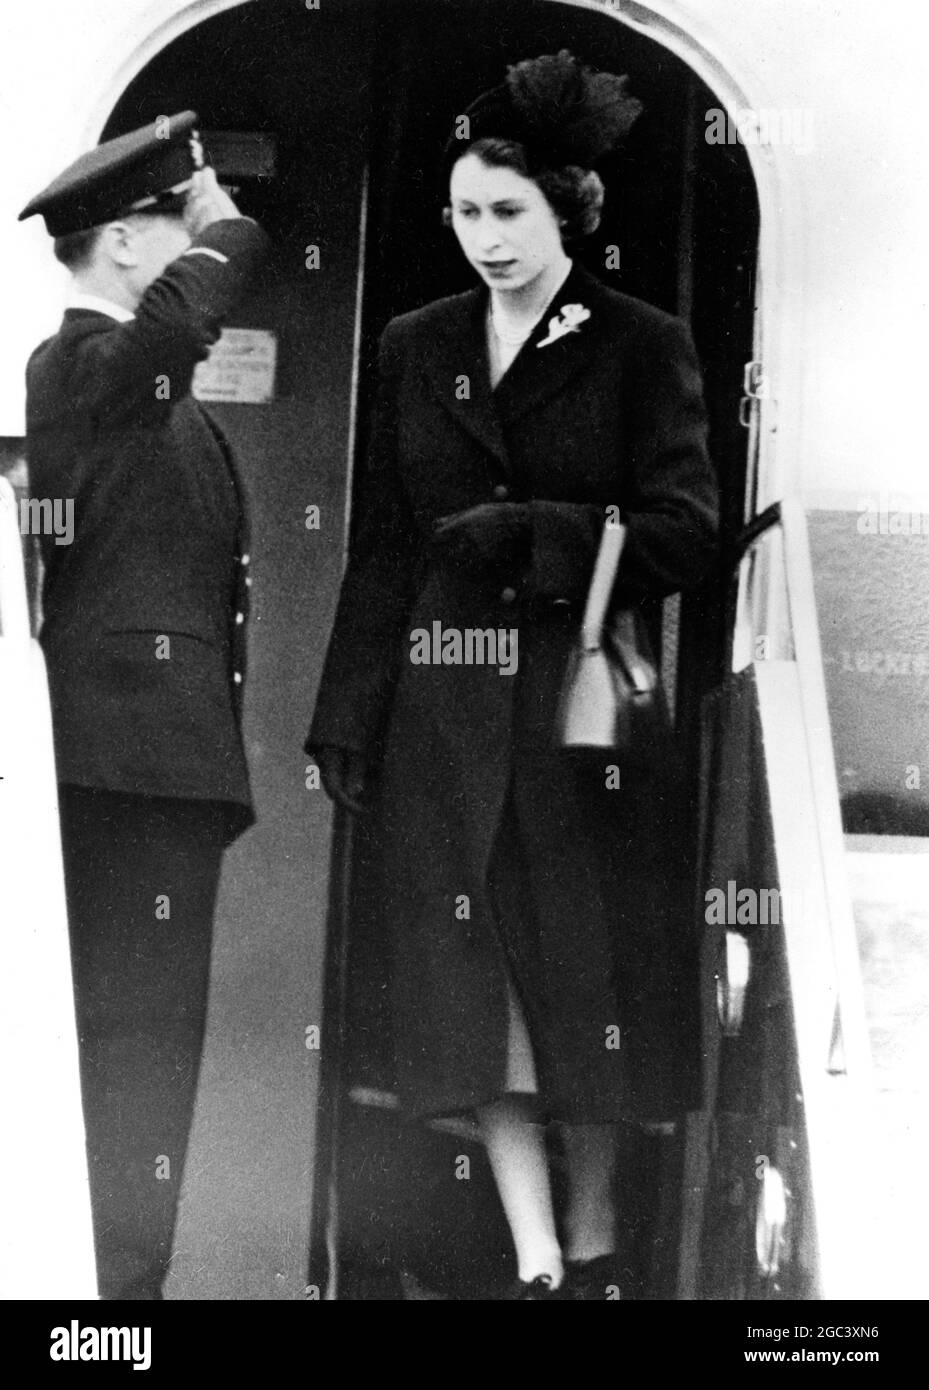 Princess Elizabeth , who left England last week with the Duke of Edinburgh on their Commonwealth Tour , returned to London Airport today from Kenya as Queen Elizabeth II . The royal couple had cut short their Commonwealth tour because of the King's death . Government and Opposition ministers , looking very sad as they mourned the passing of King George VI , were at the airport to officially welcome the new Queen . Seen here alighting from the plane . 7 February 1952 Stock Photo